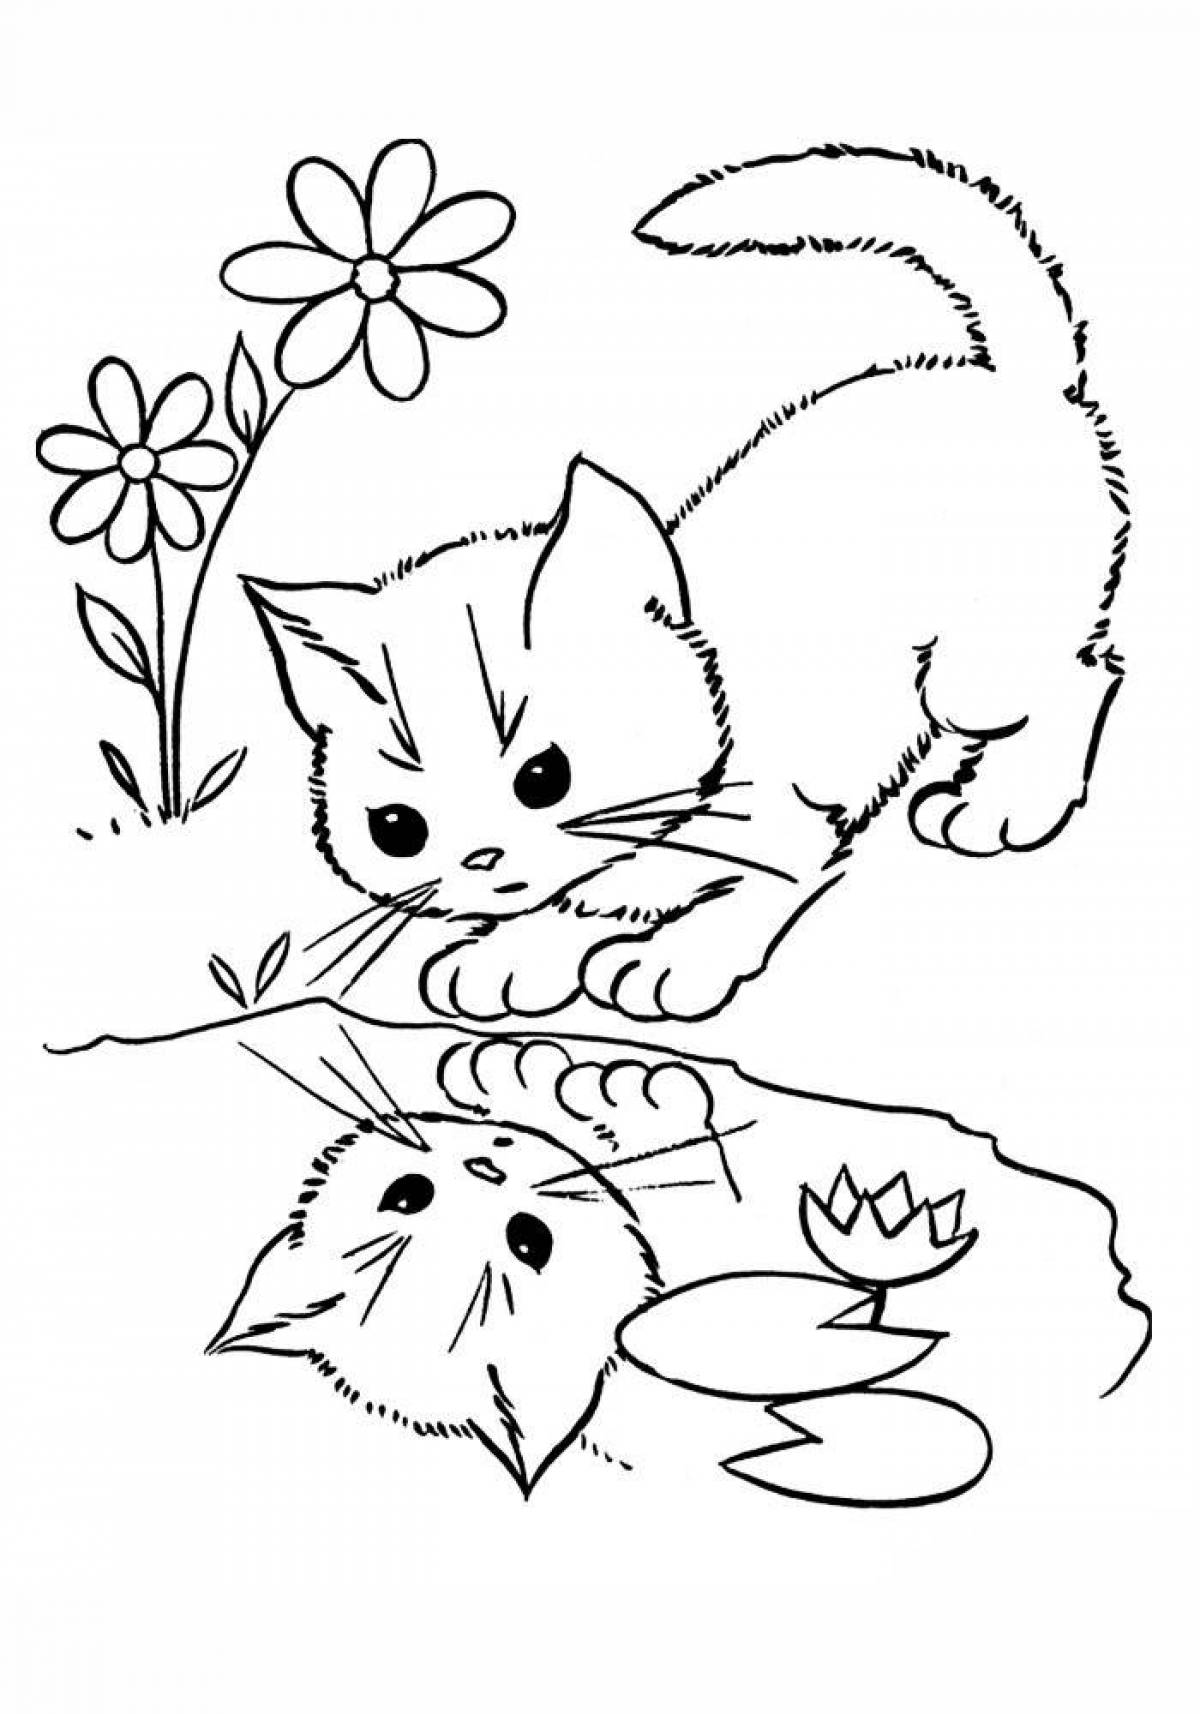 Naughty kitten coloring book for kids